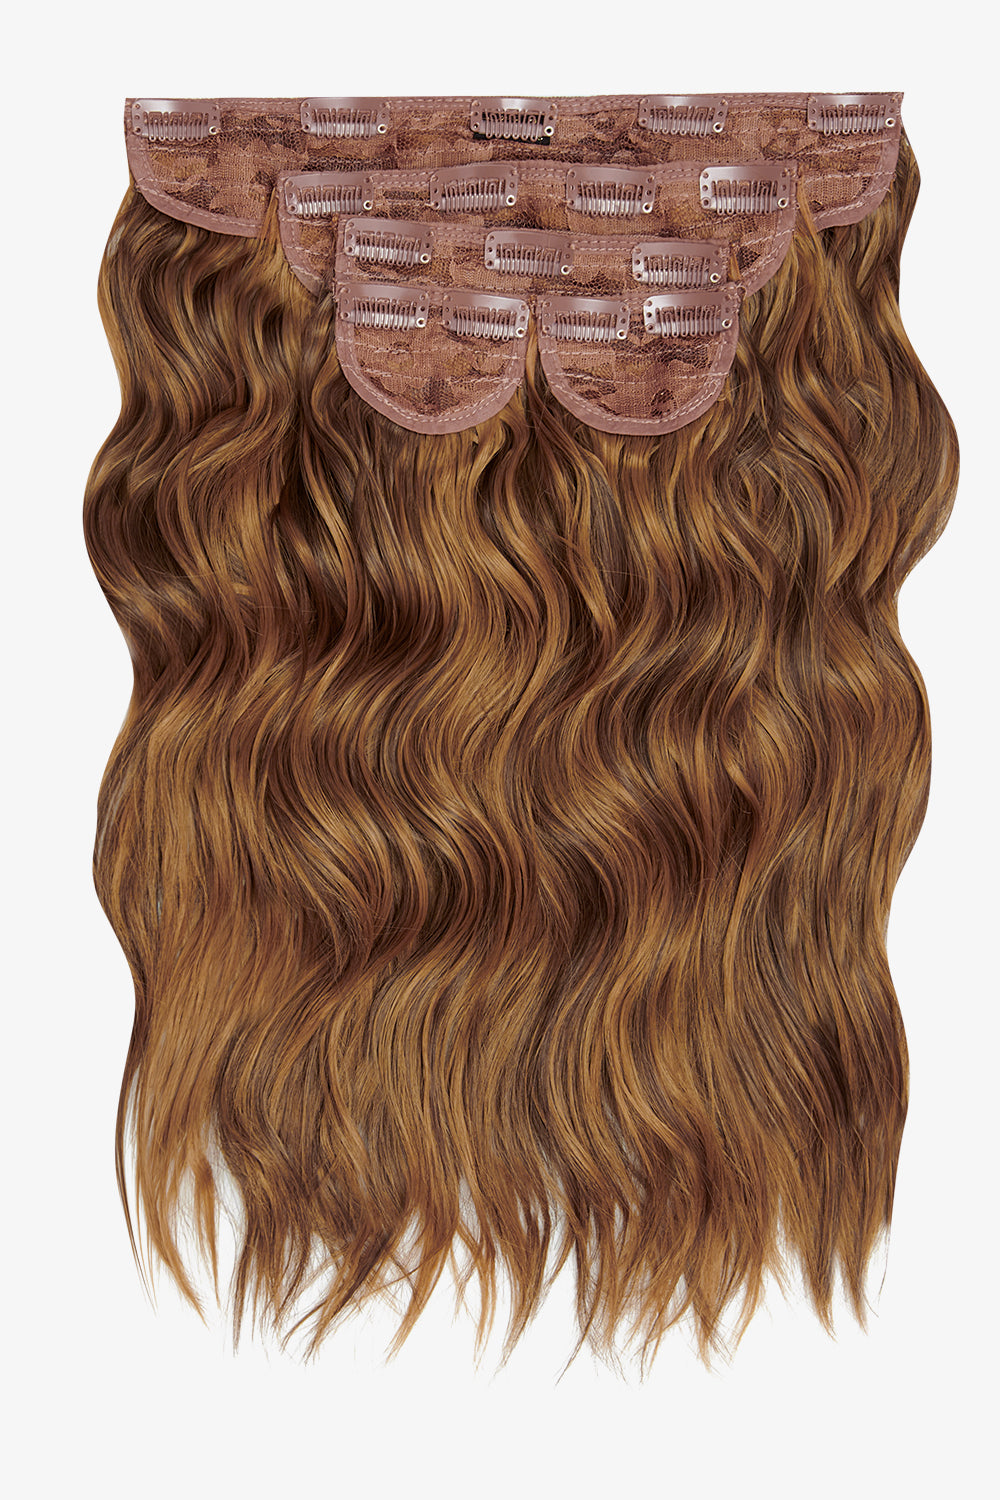 Super Thick 16’’ 5 Piece Brushed Out Wave Clip In Hair Extensions + Hair Care Bundle - Toffee Brown